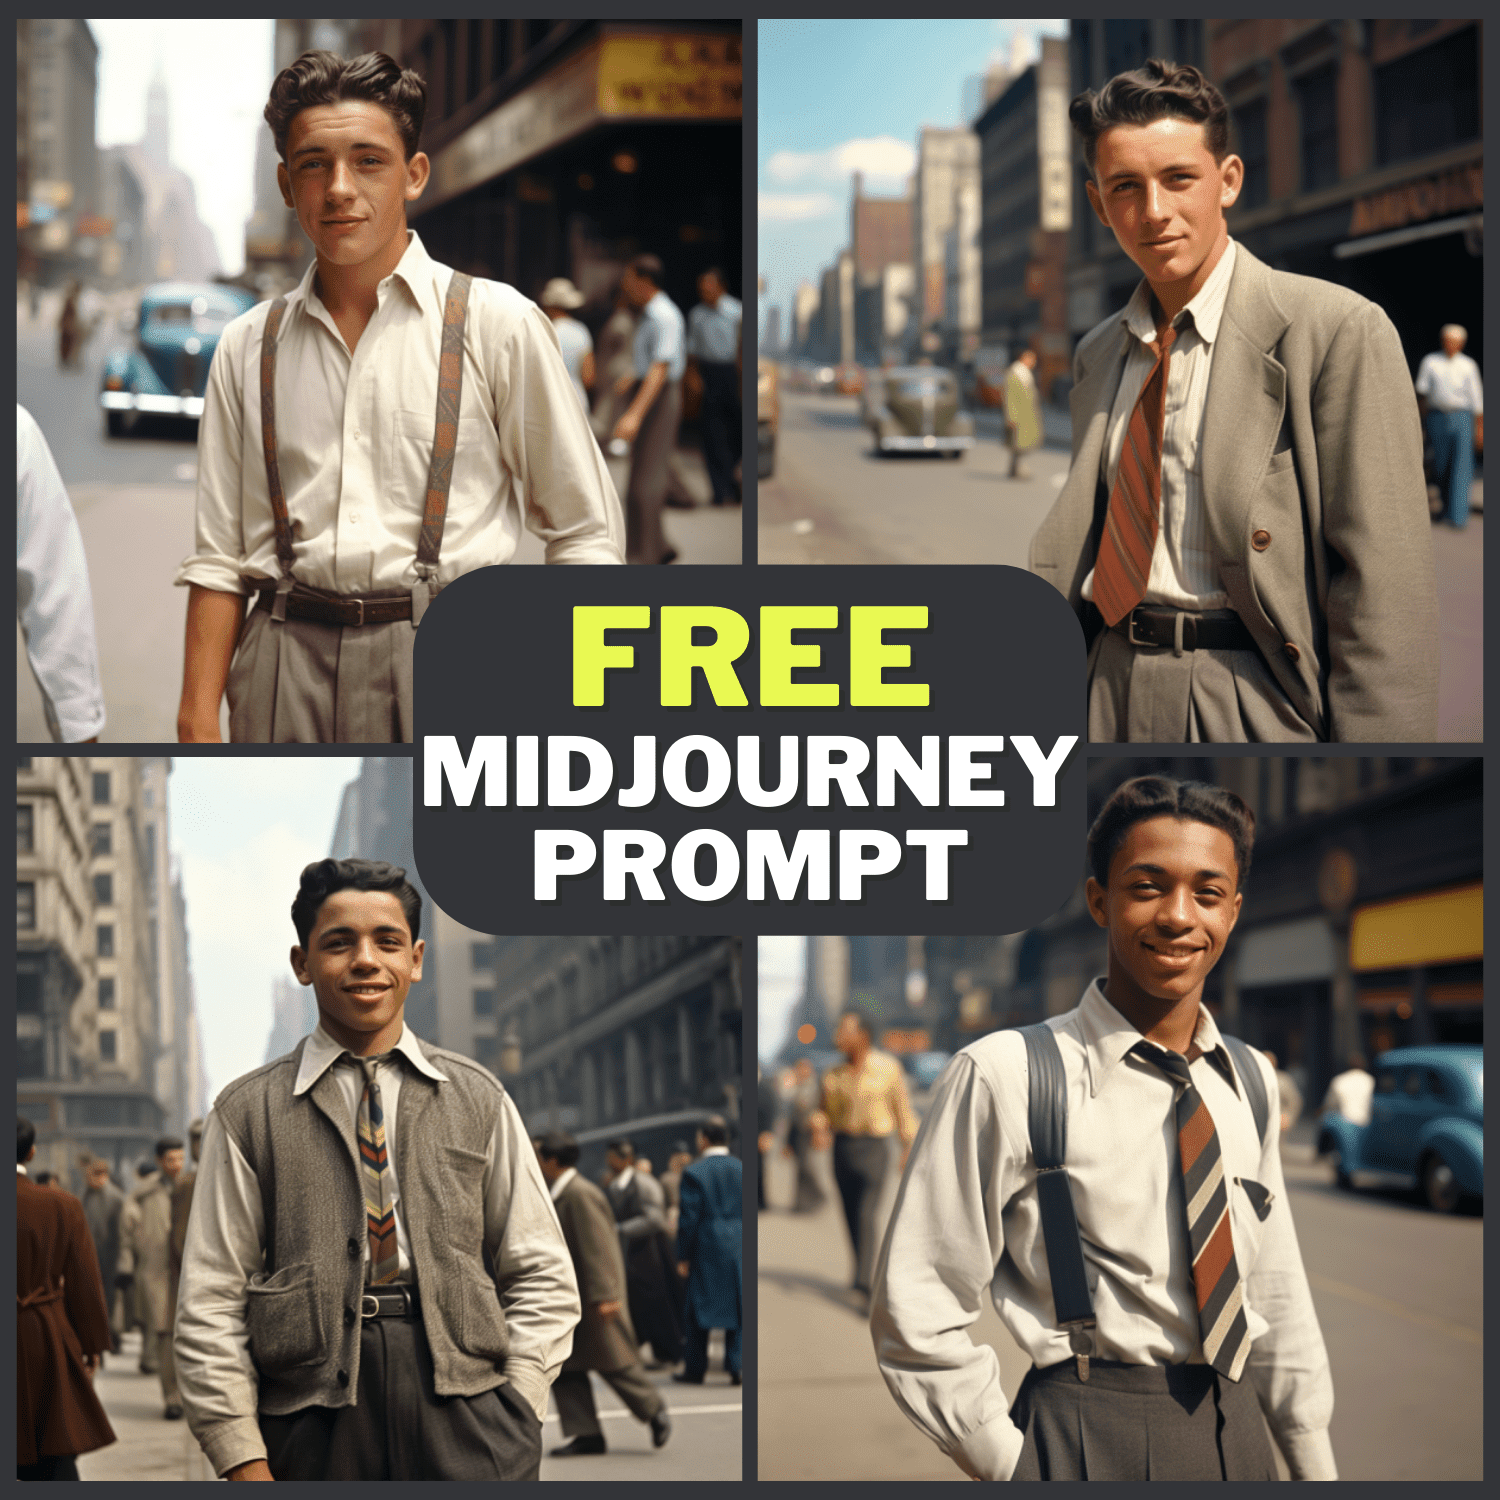 Young Man Vintage Photo Free Midjourney Prompt 1